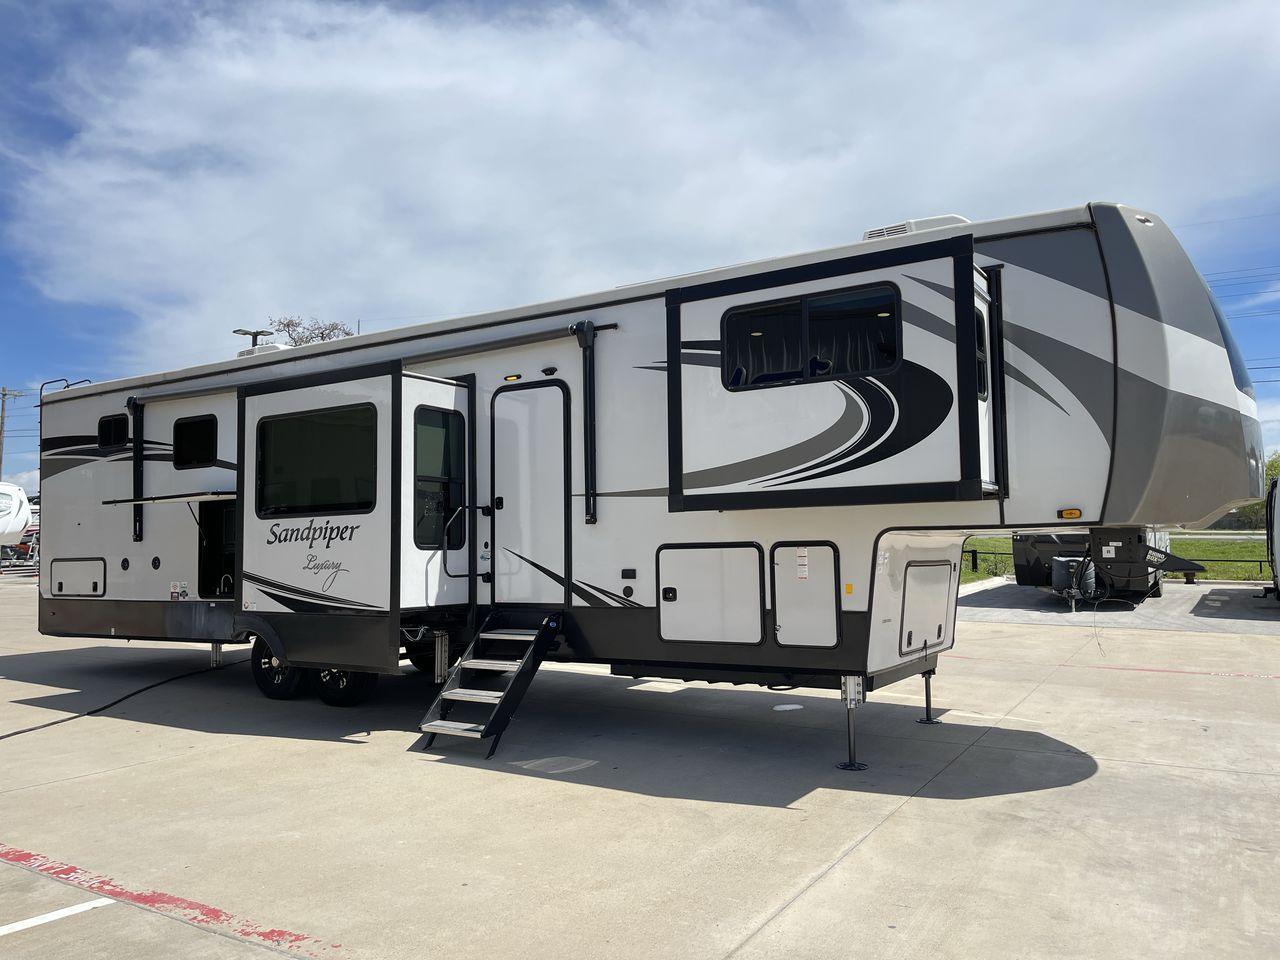 2022 FOREST RIVER SANDPIPER 391FLRB (4X4FSAR26NJ) , Length: 43.5 ft. | Dry Weight: 13,009 lbs | Gross Weight: 16,009 lbs | Slides: 5 transmission, located at 4319 N Main Street, Cleburne, TX, 76033, (817) 221-0660, 32.435829, -97.384178 - The 2022 Forest River Sandpiper 391FLRB is elegance meets adventure in the great outdoors. This fifth wheel, standing at 43.5 feet tall and featuring an aluminum body and fiberglass sides, is a symbol of durability and style on the road. It weighs 13,009 lbs. dry and can carry up to 16,009 lbs gross - Photo #24